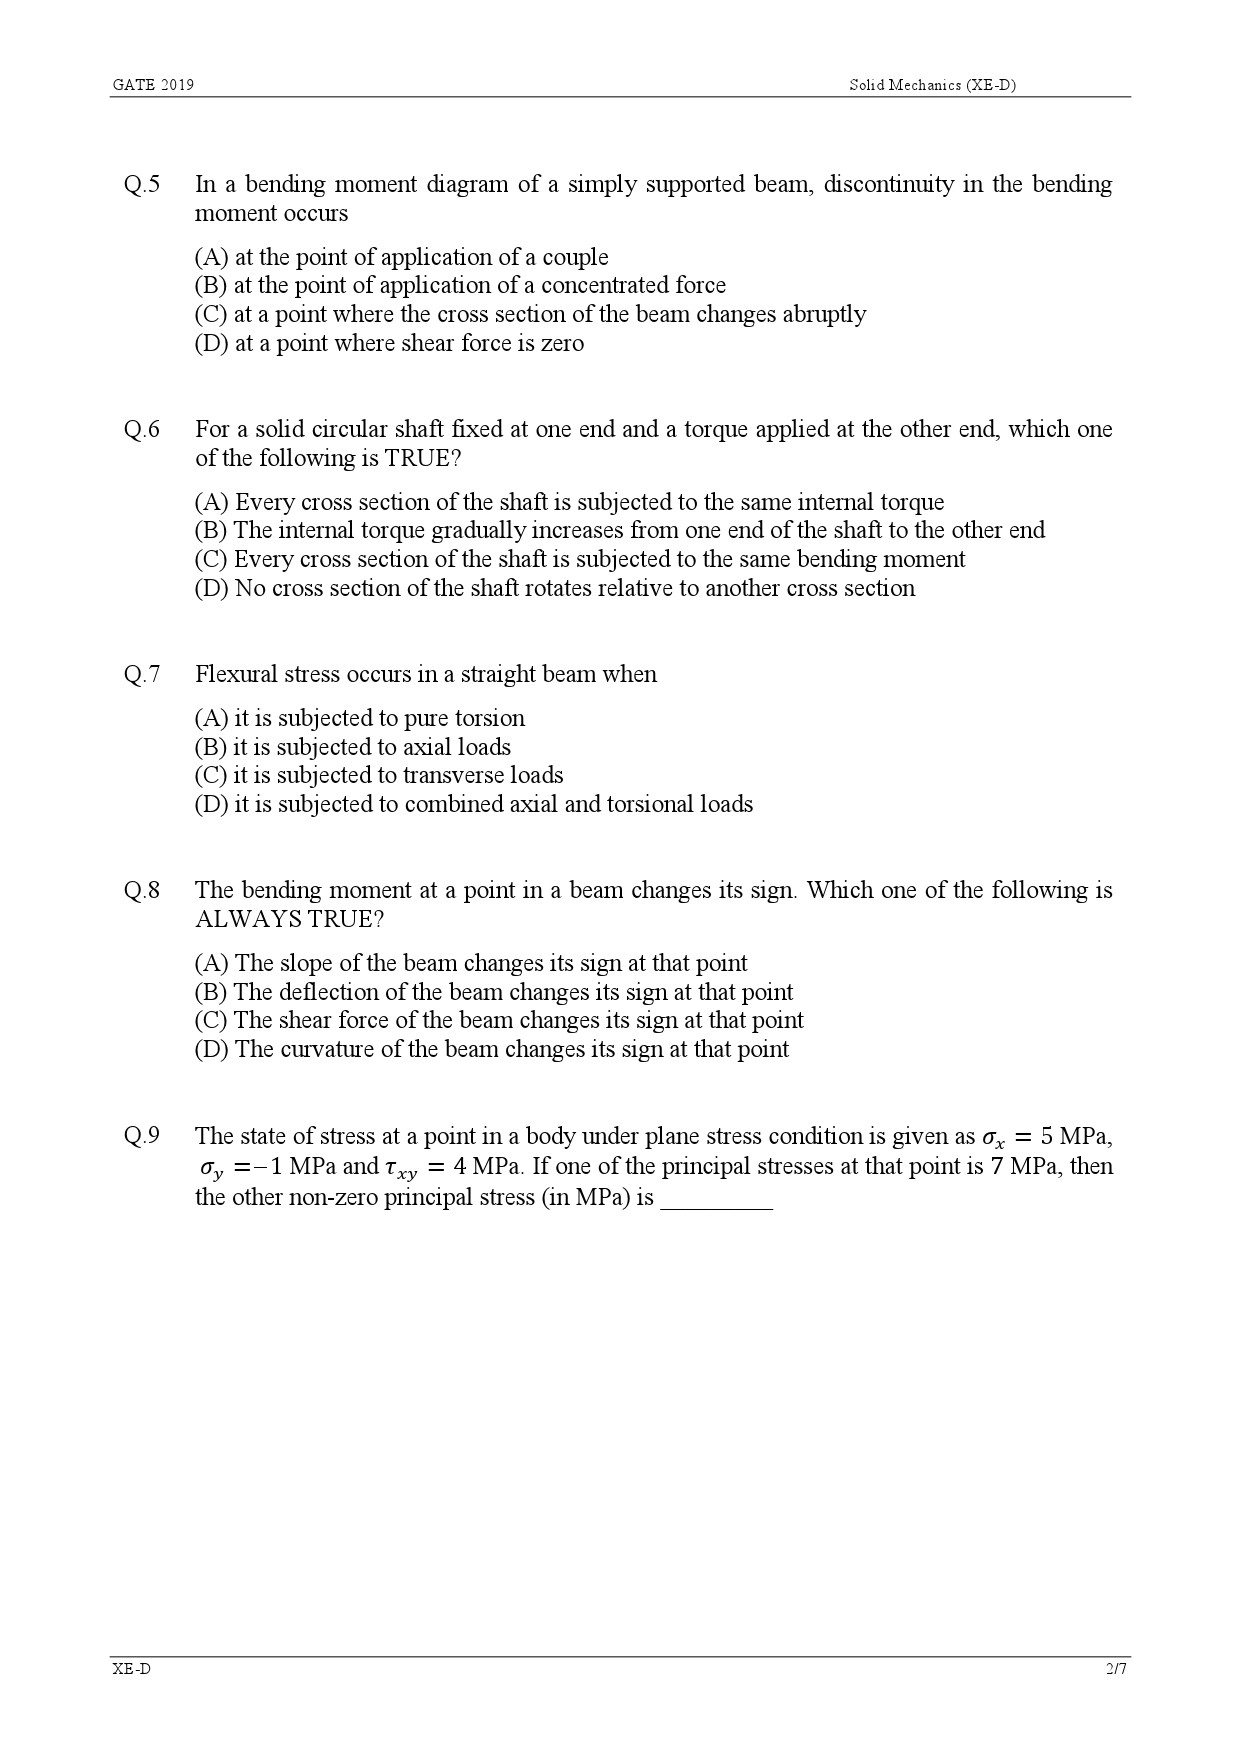 GATE Exam Question Paper 2019 Engineering Sciences 17